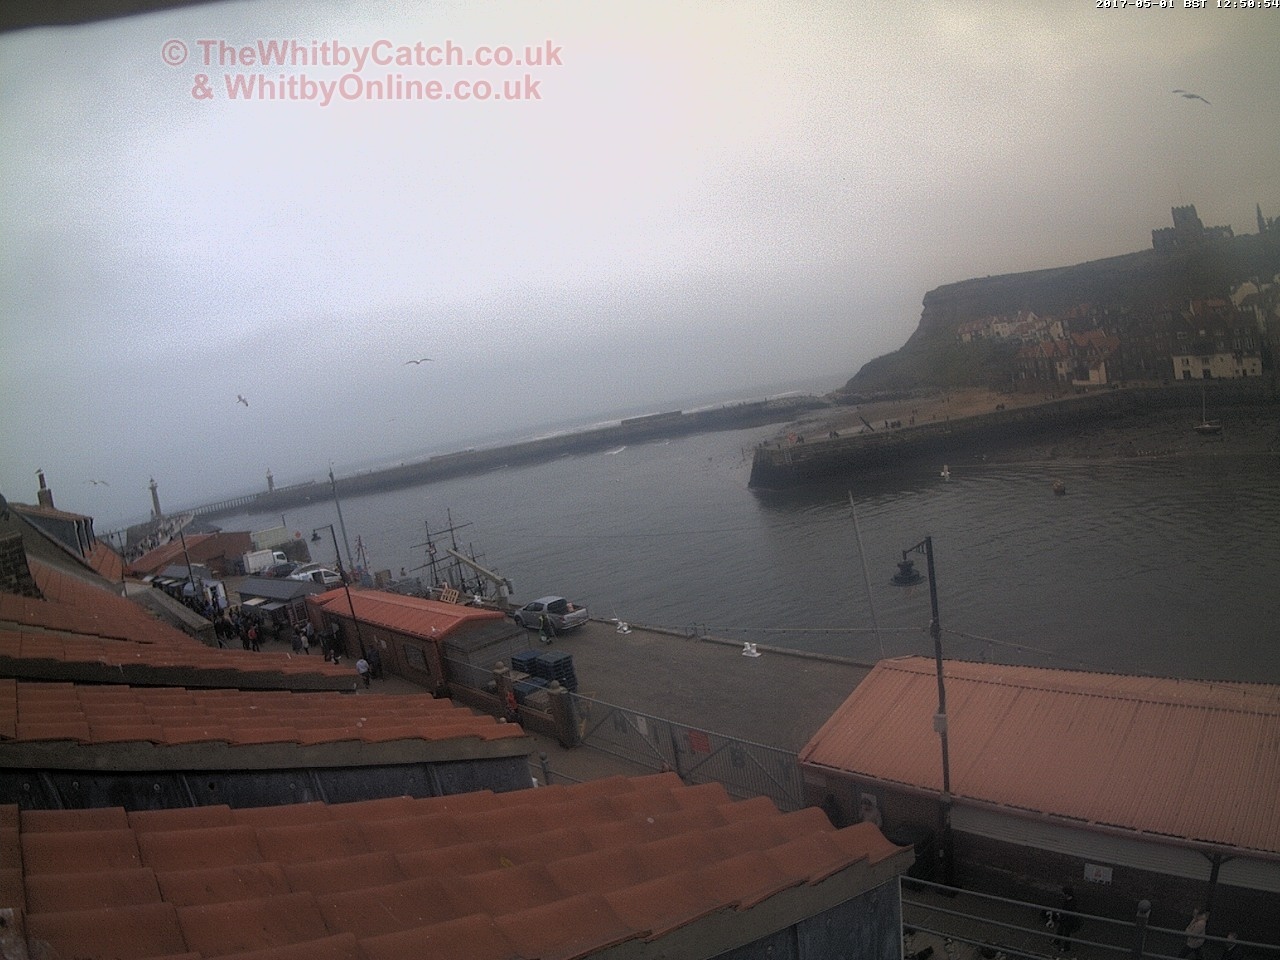 Whitby Mon 1st May 2017 12:51.